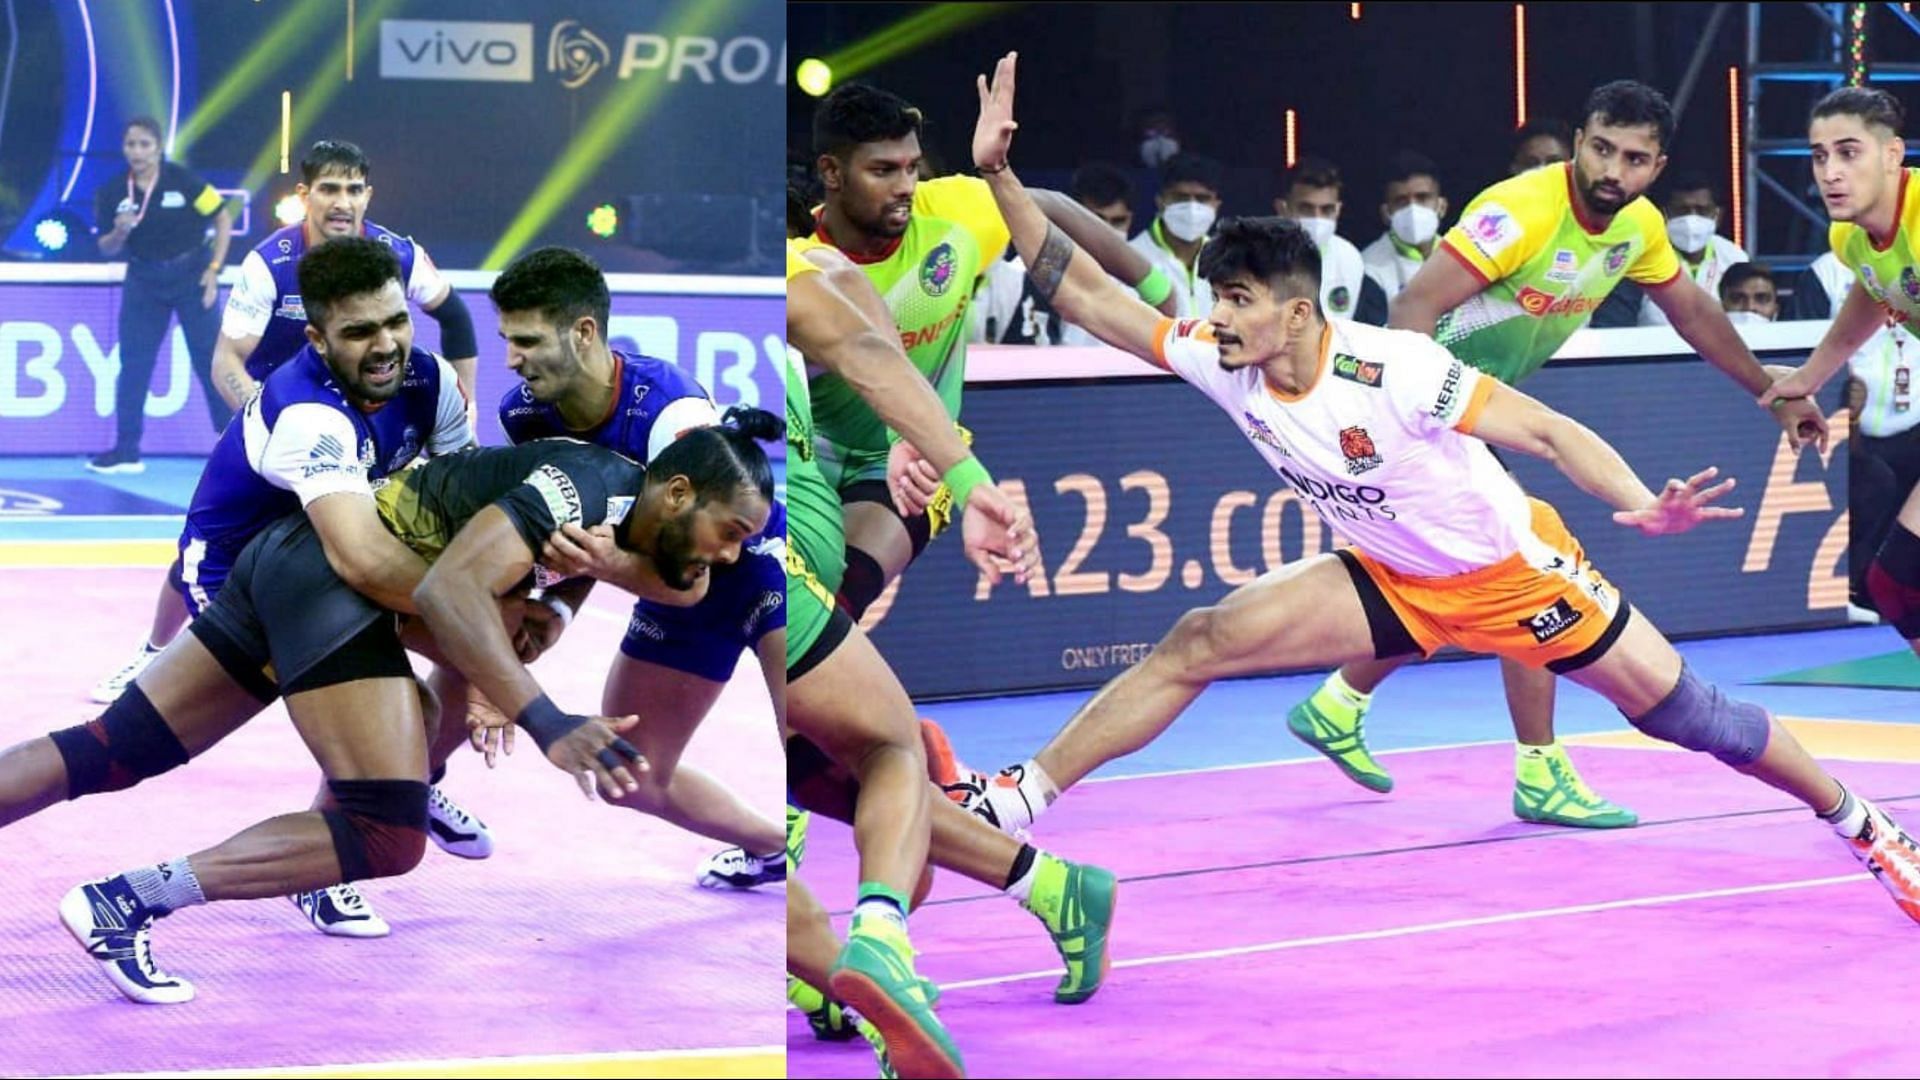 Pro Kabaddi 2021 continued in Bengaluru with another double-header